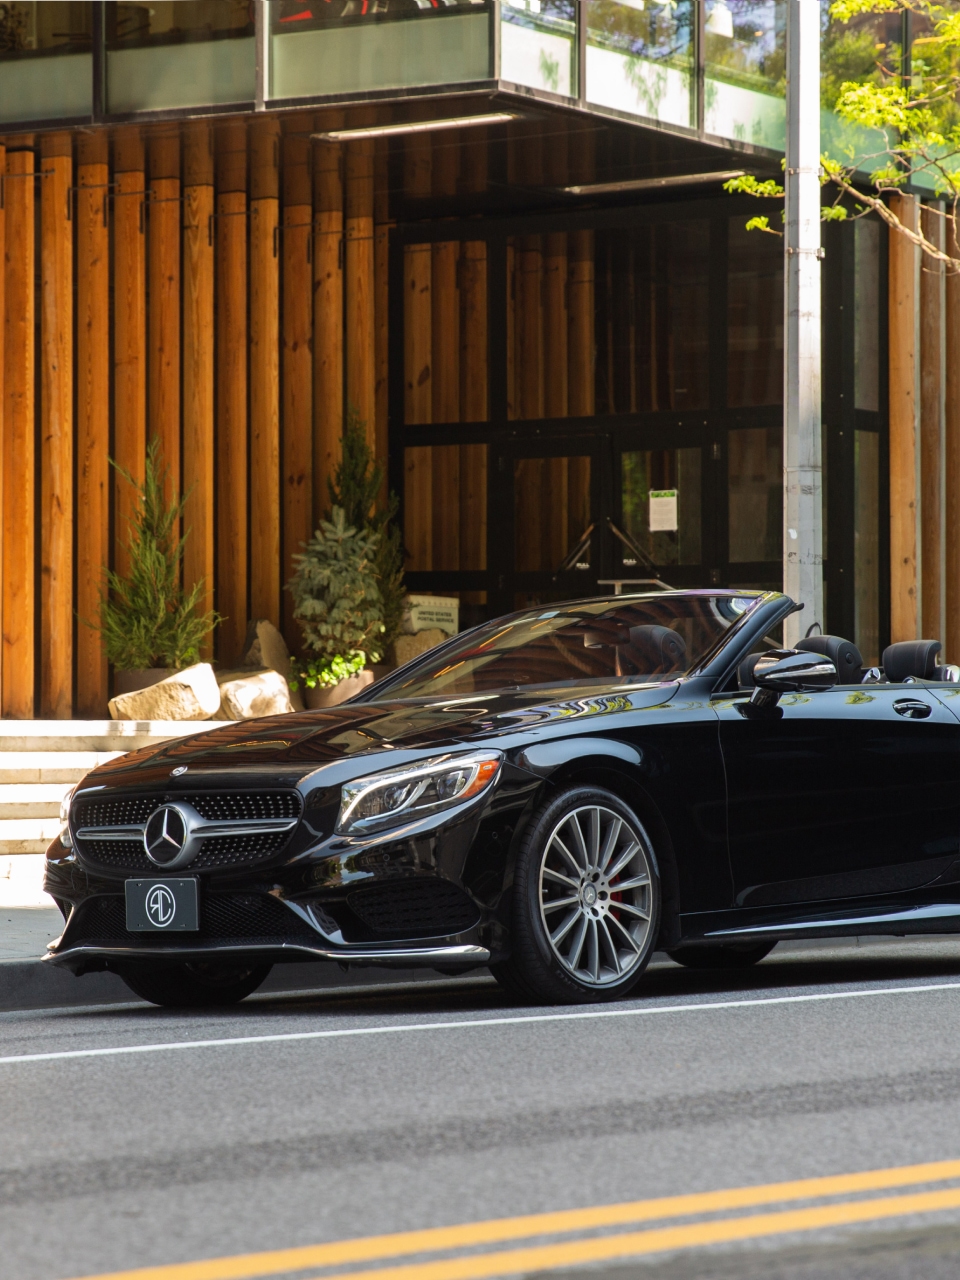 Hire Mercedes S550 Convertible in NY